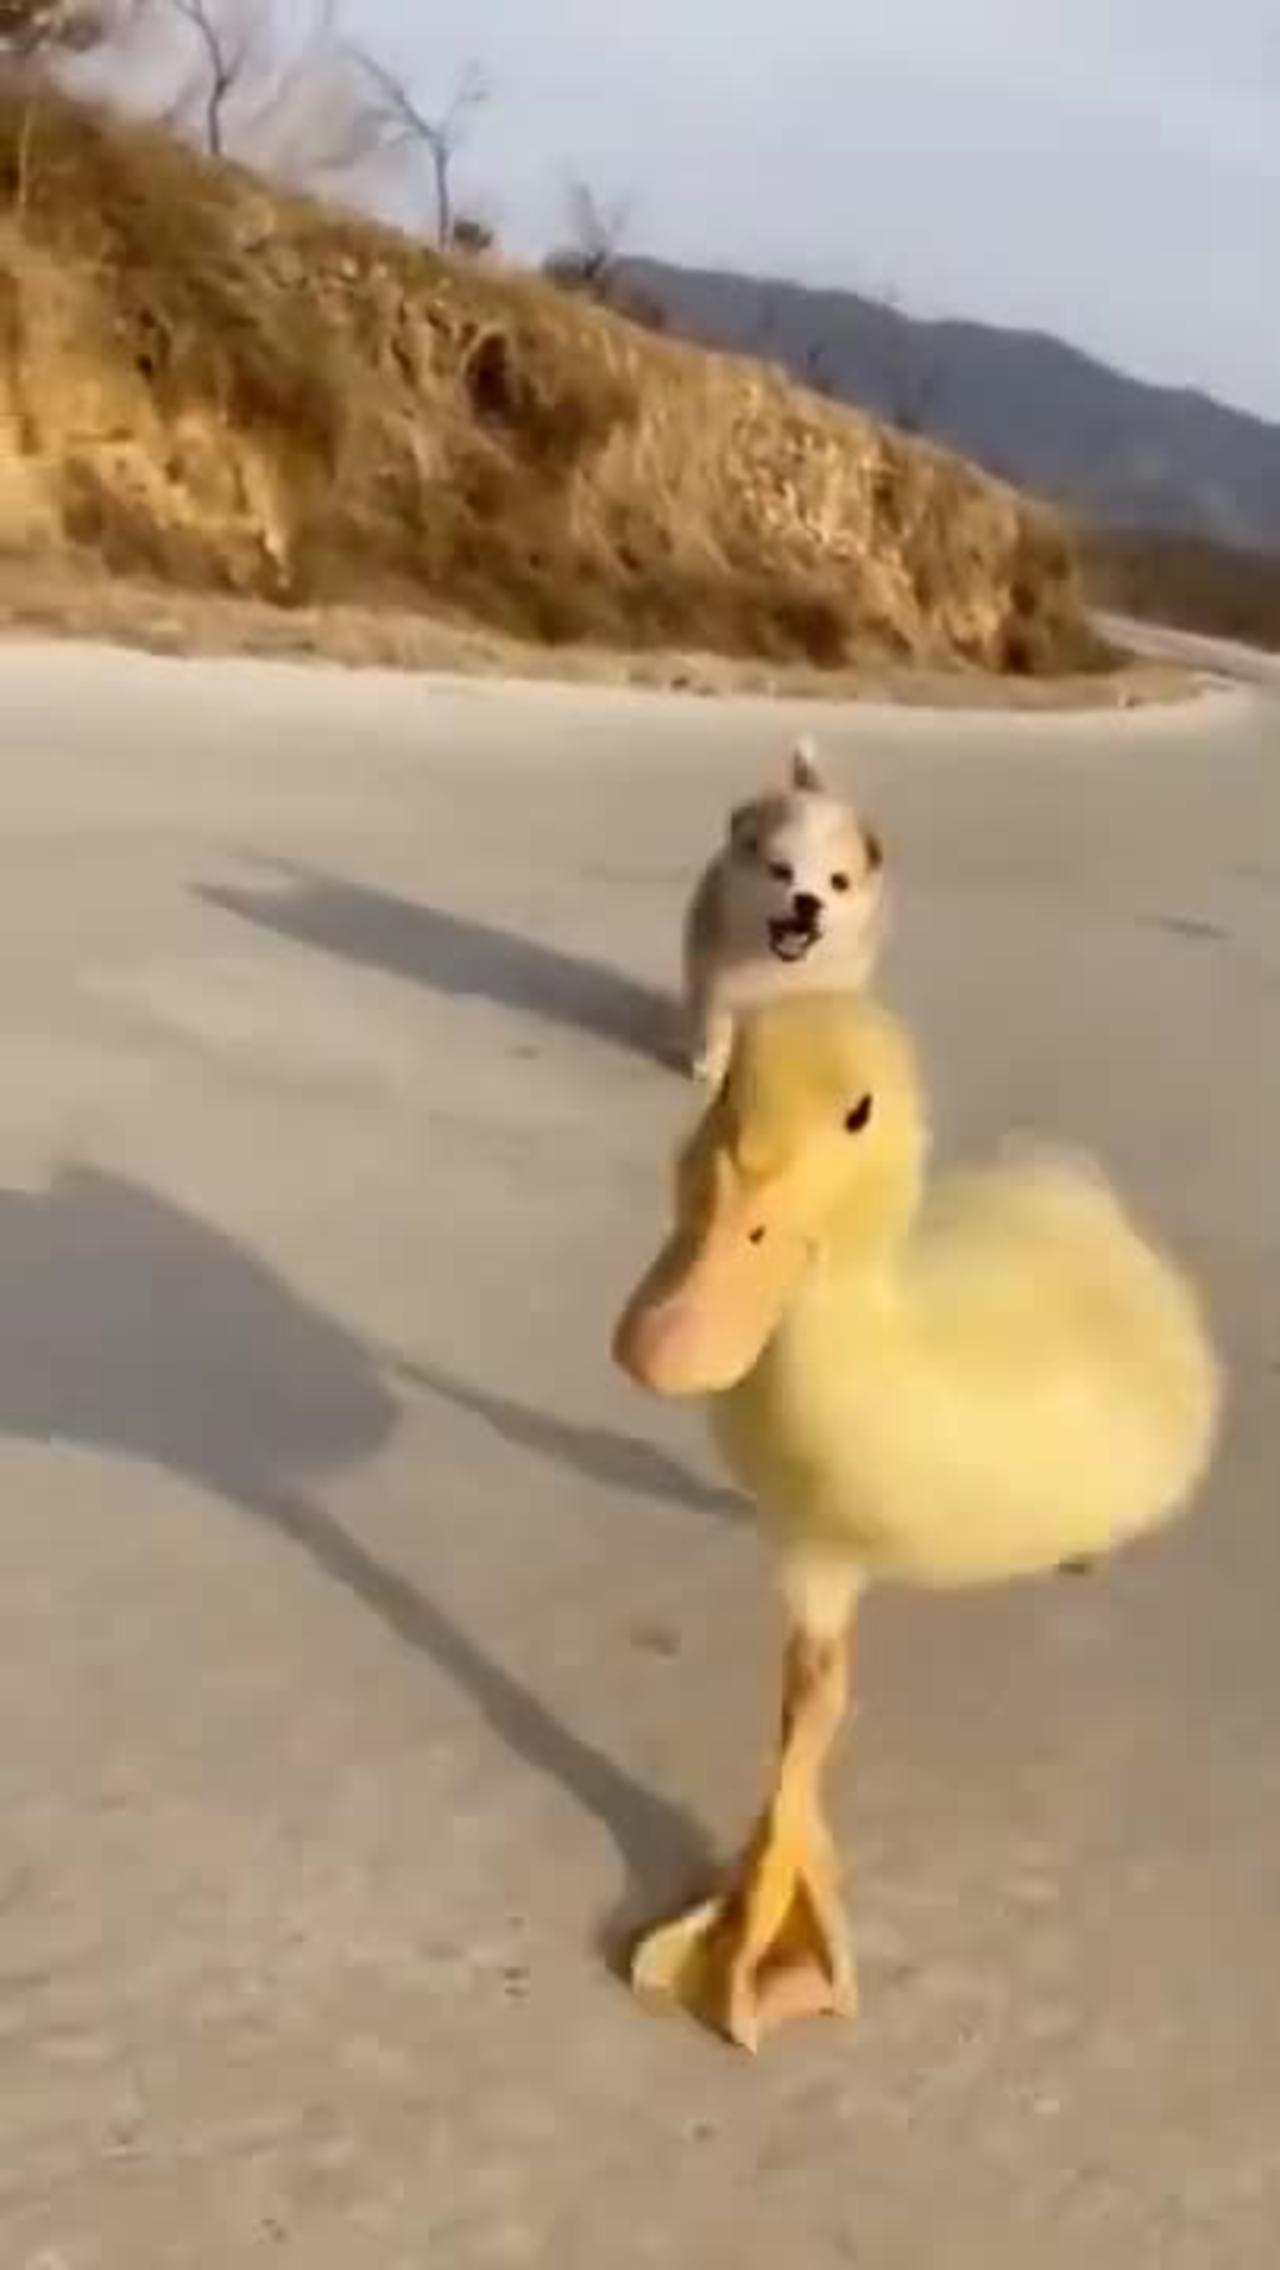 Puppy and Baby Chicken's funny race